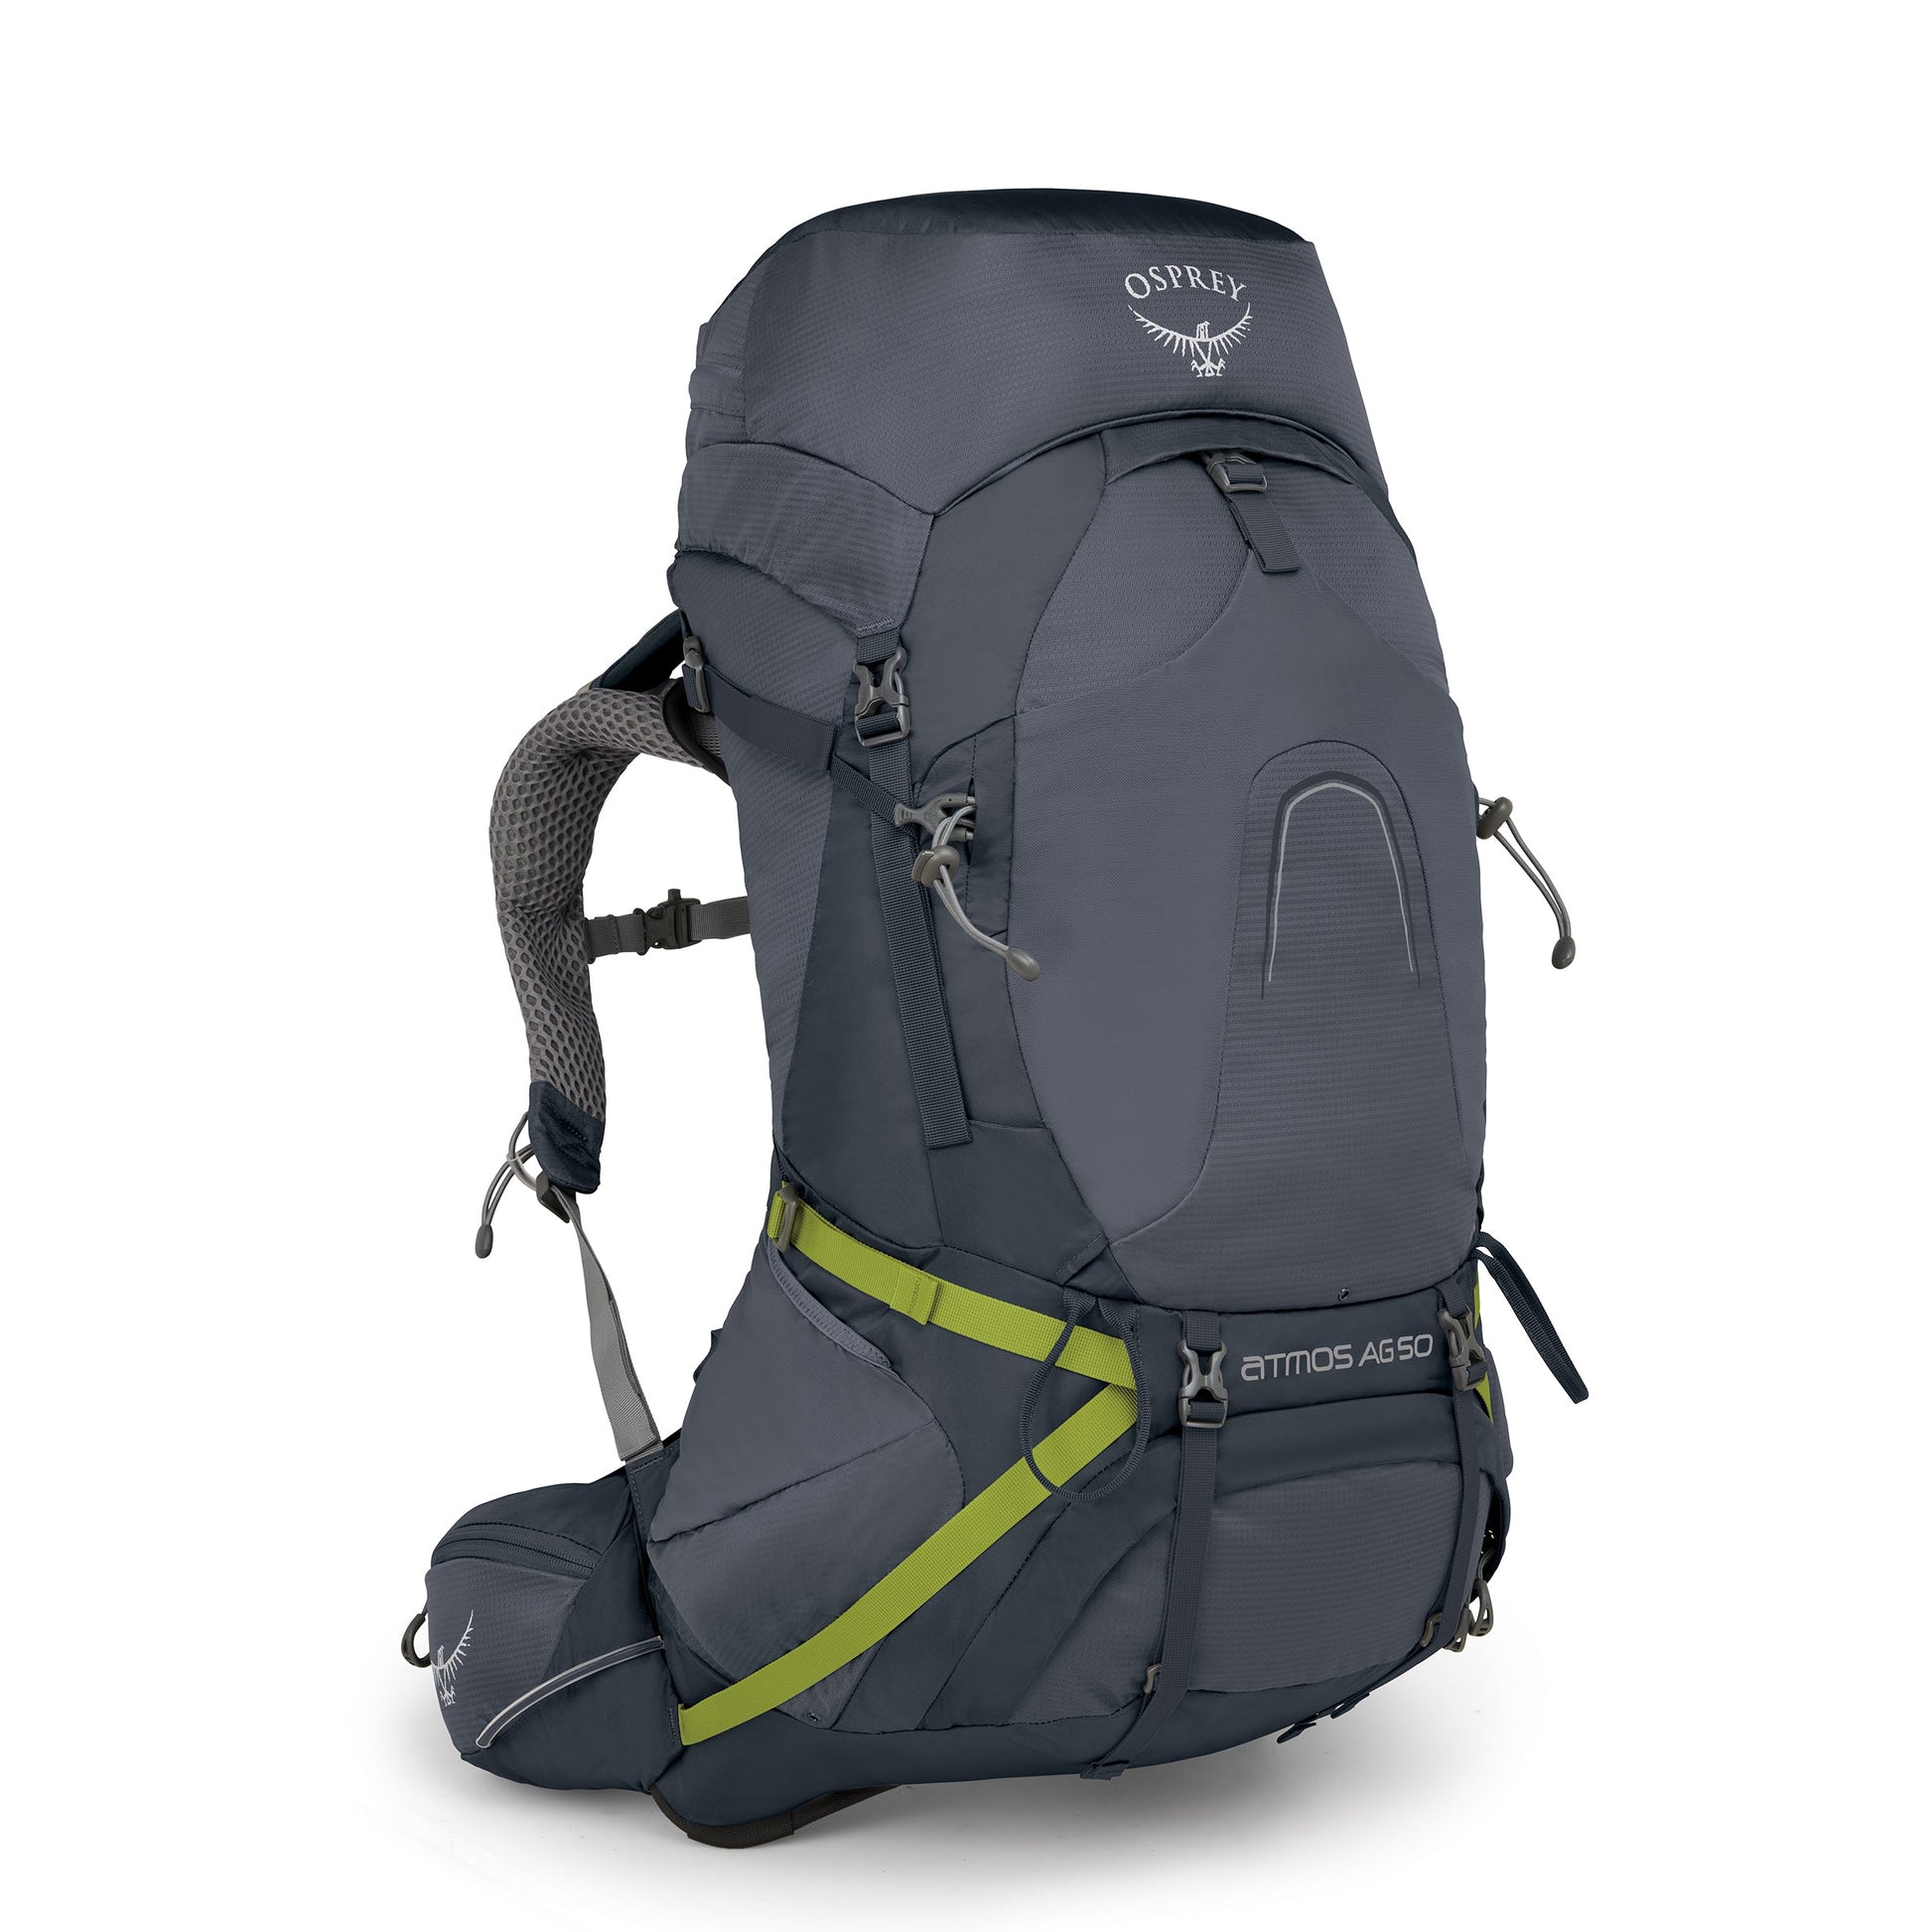 Atmos AG 50 Big Adventure Outfitters